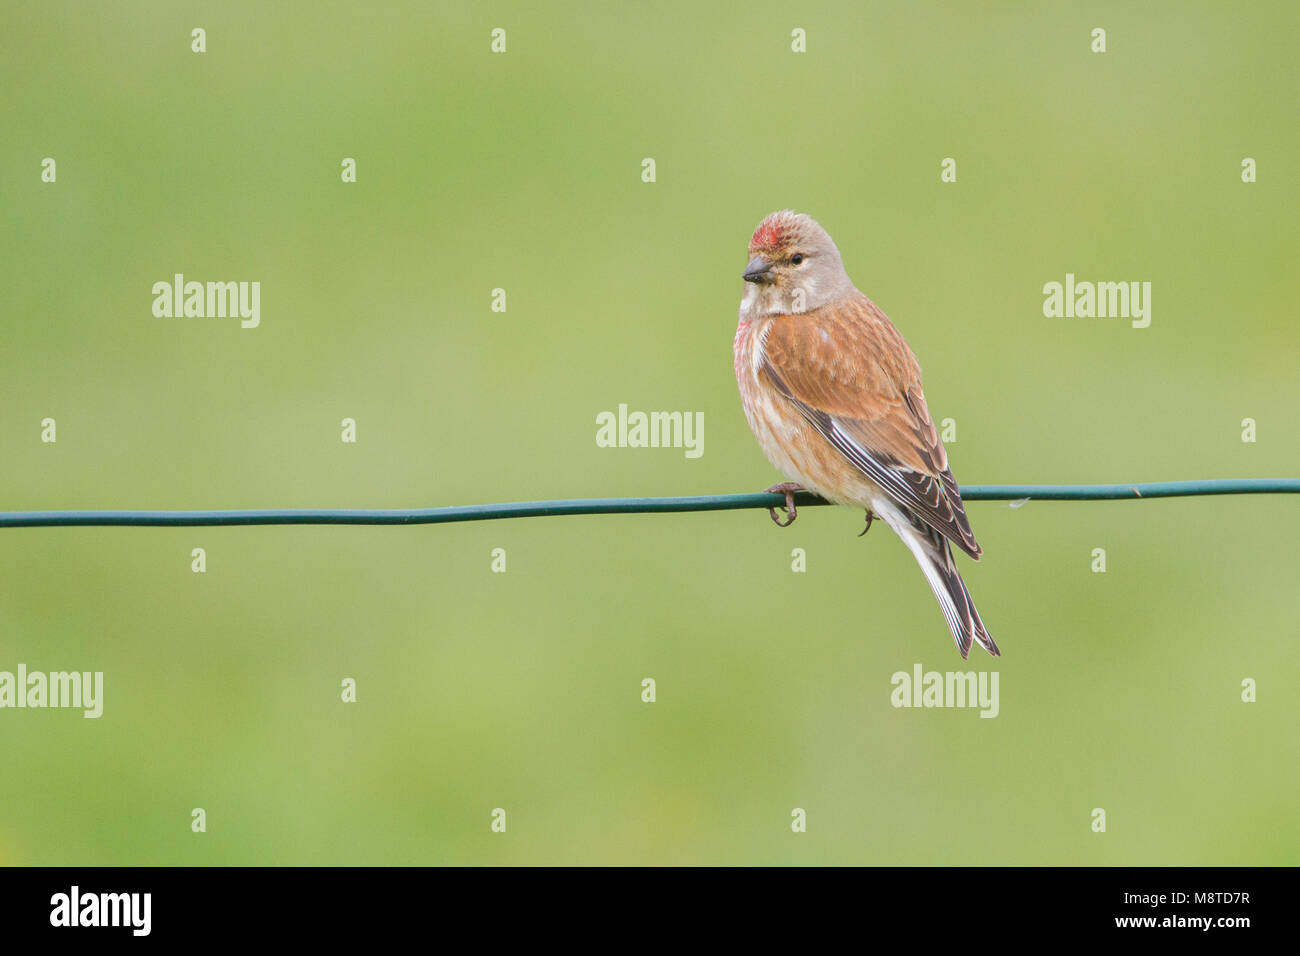 Kneu zit op tak; Common Linnet perched on branch Stock Photo